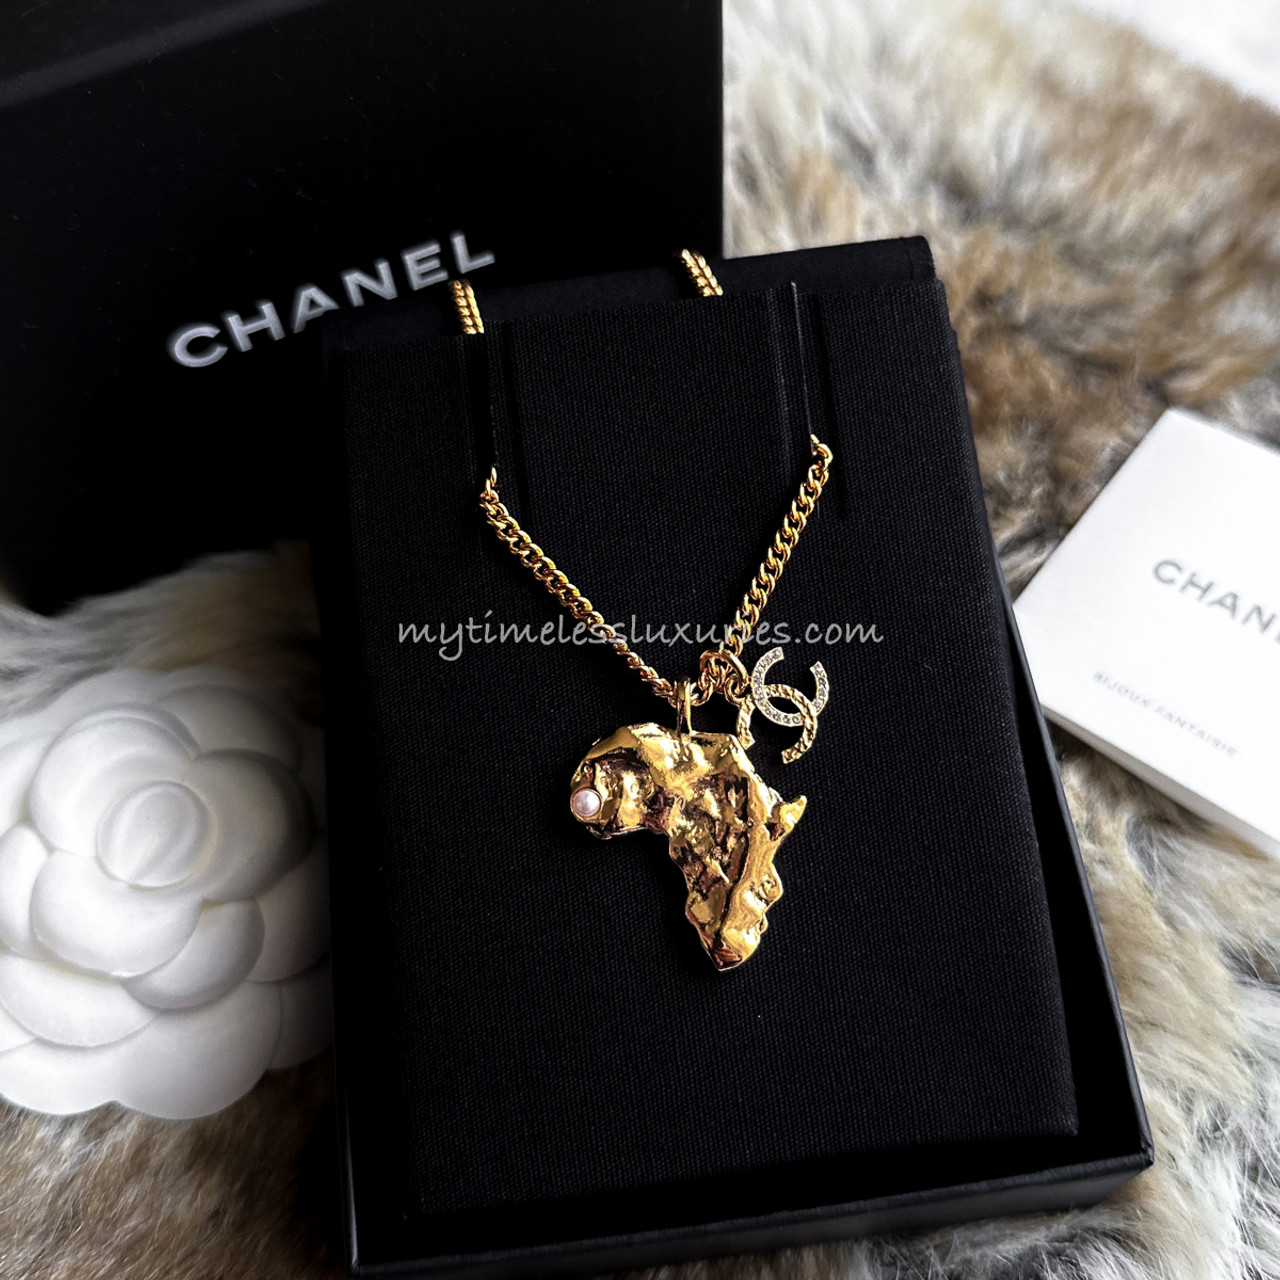 CHANEL 23A Africa Map Necklace *New - Timeless Luxuries